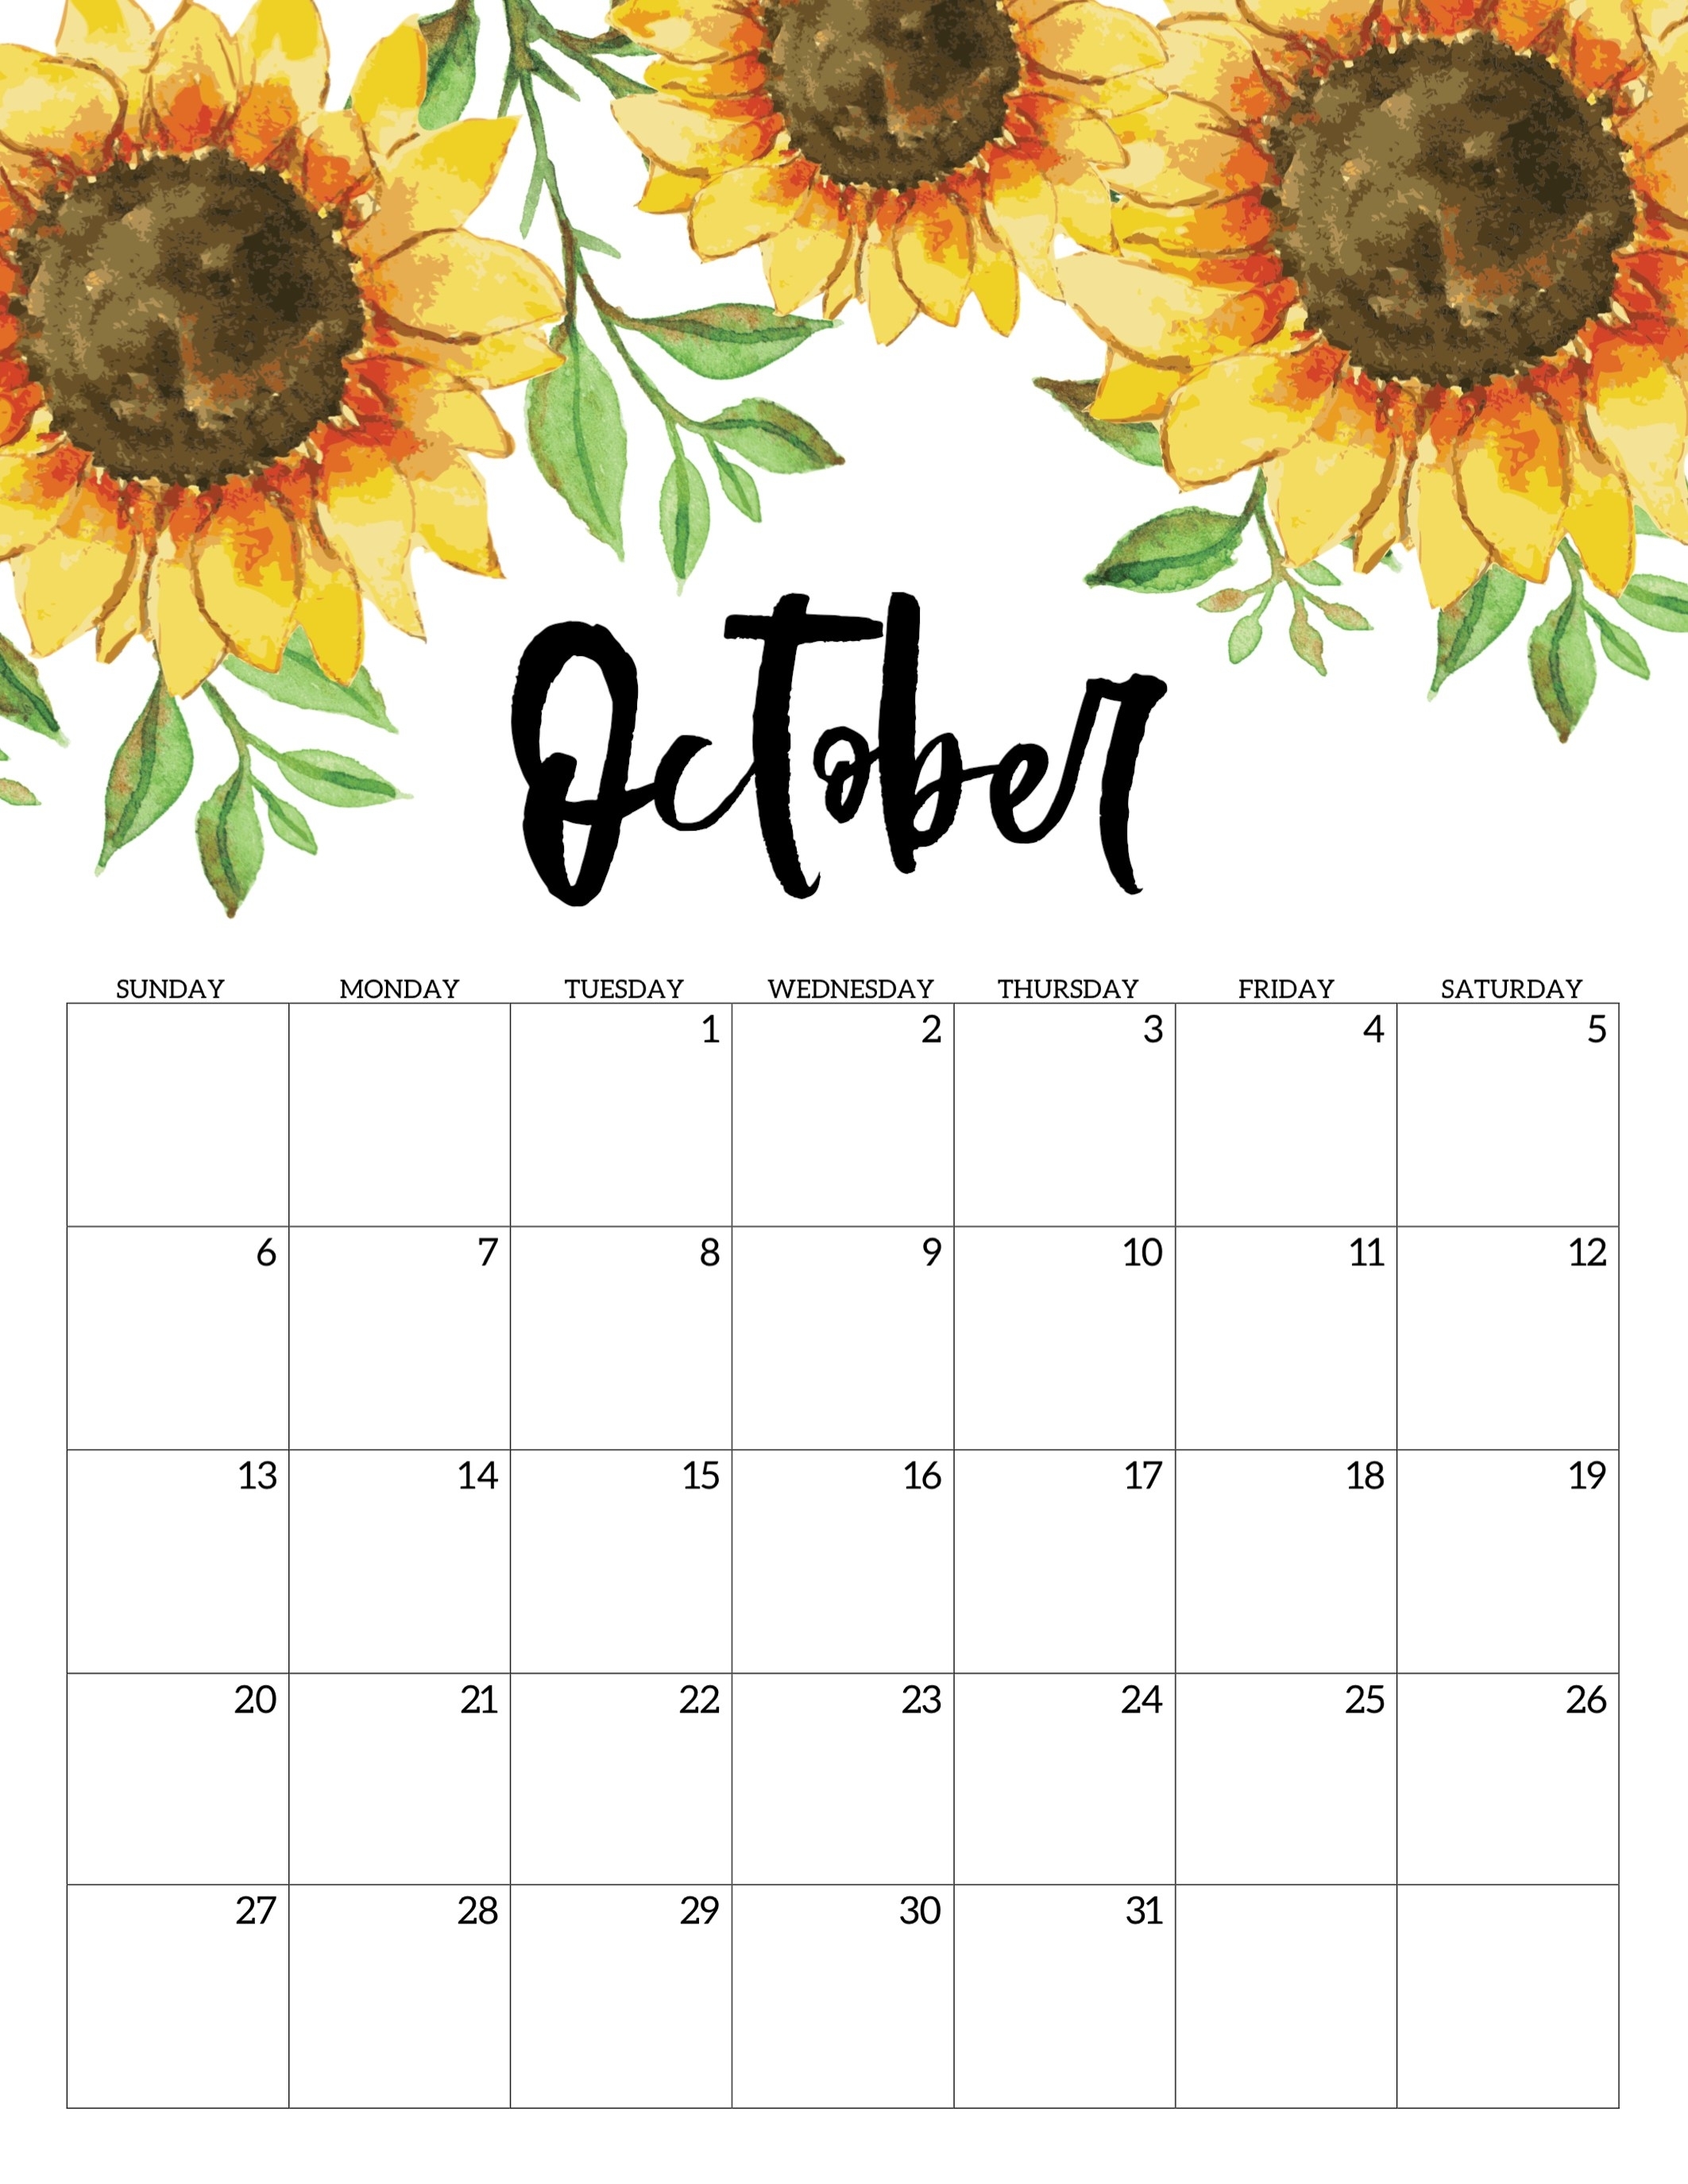 Free Printable Calendar 2019 - Floral - Paper Trail Design intended for Monthly Calendar Watercolor Floral Printable